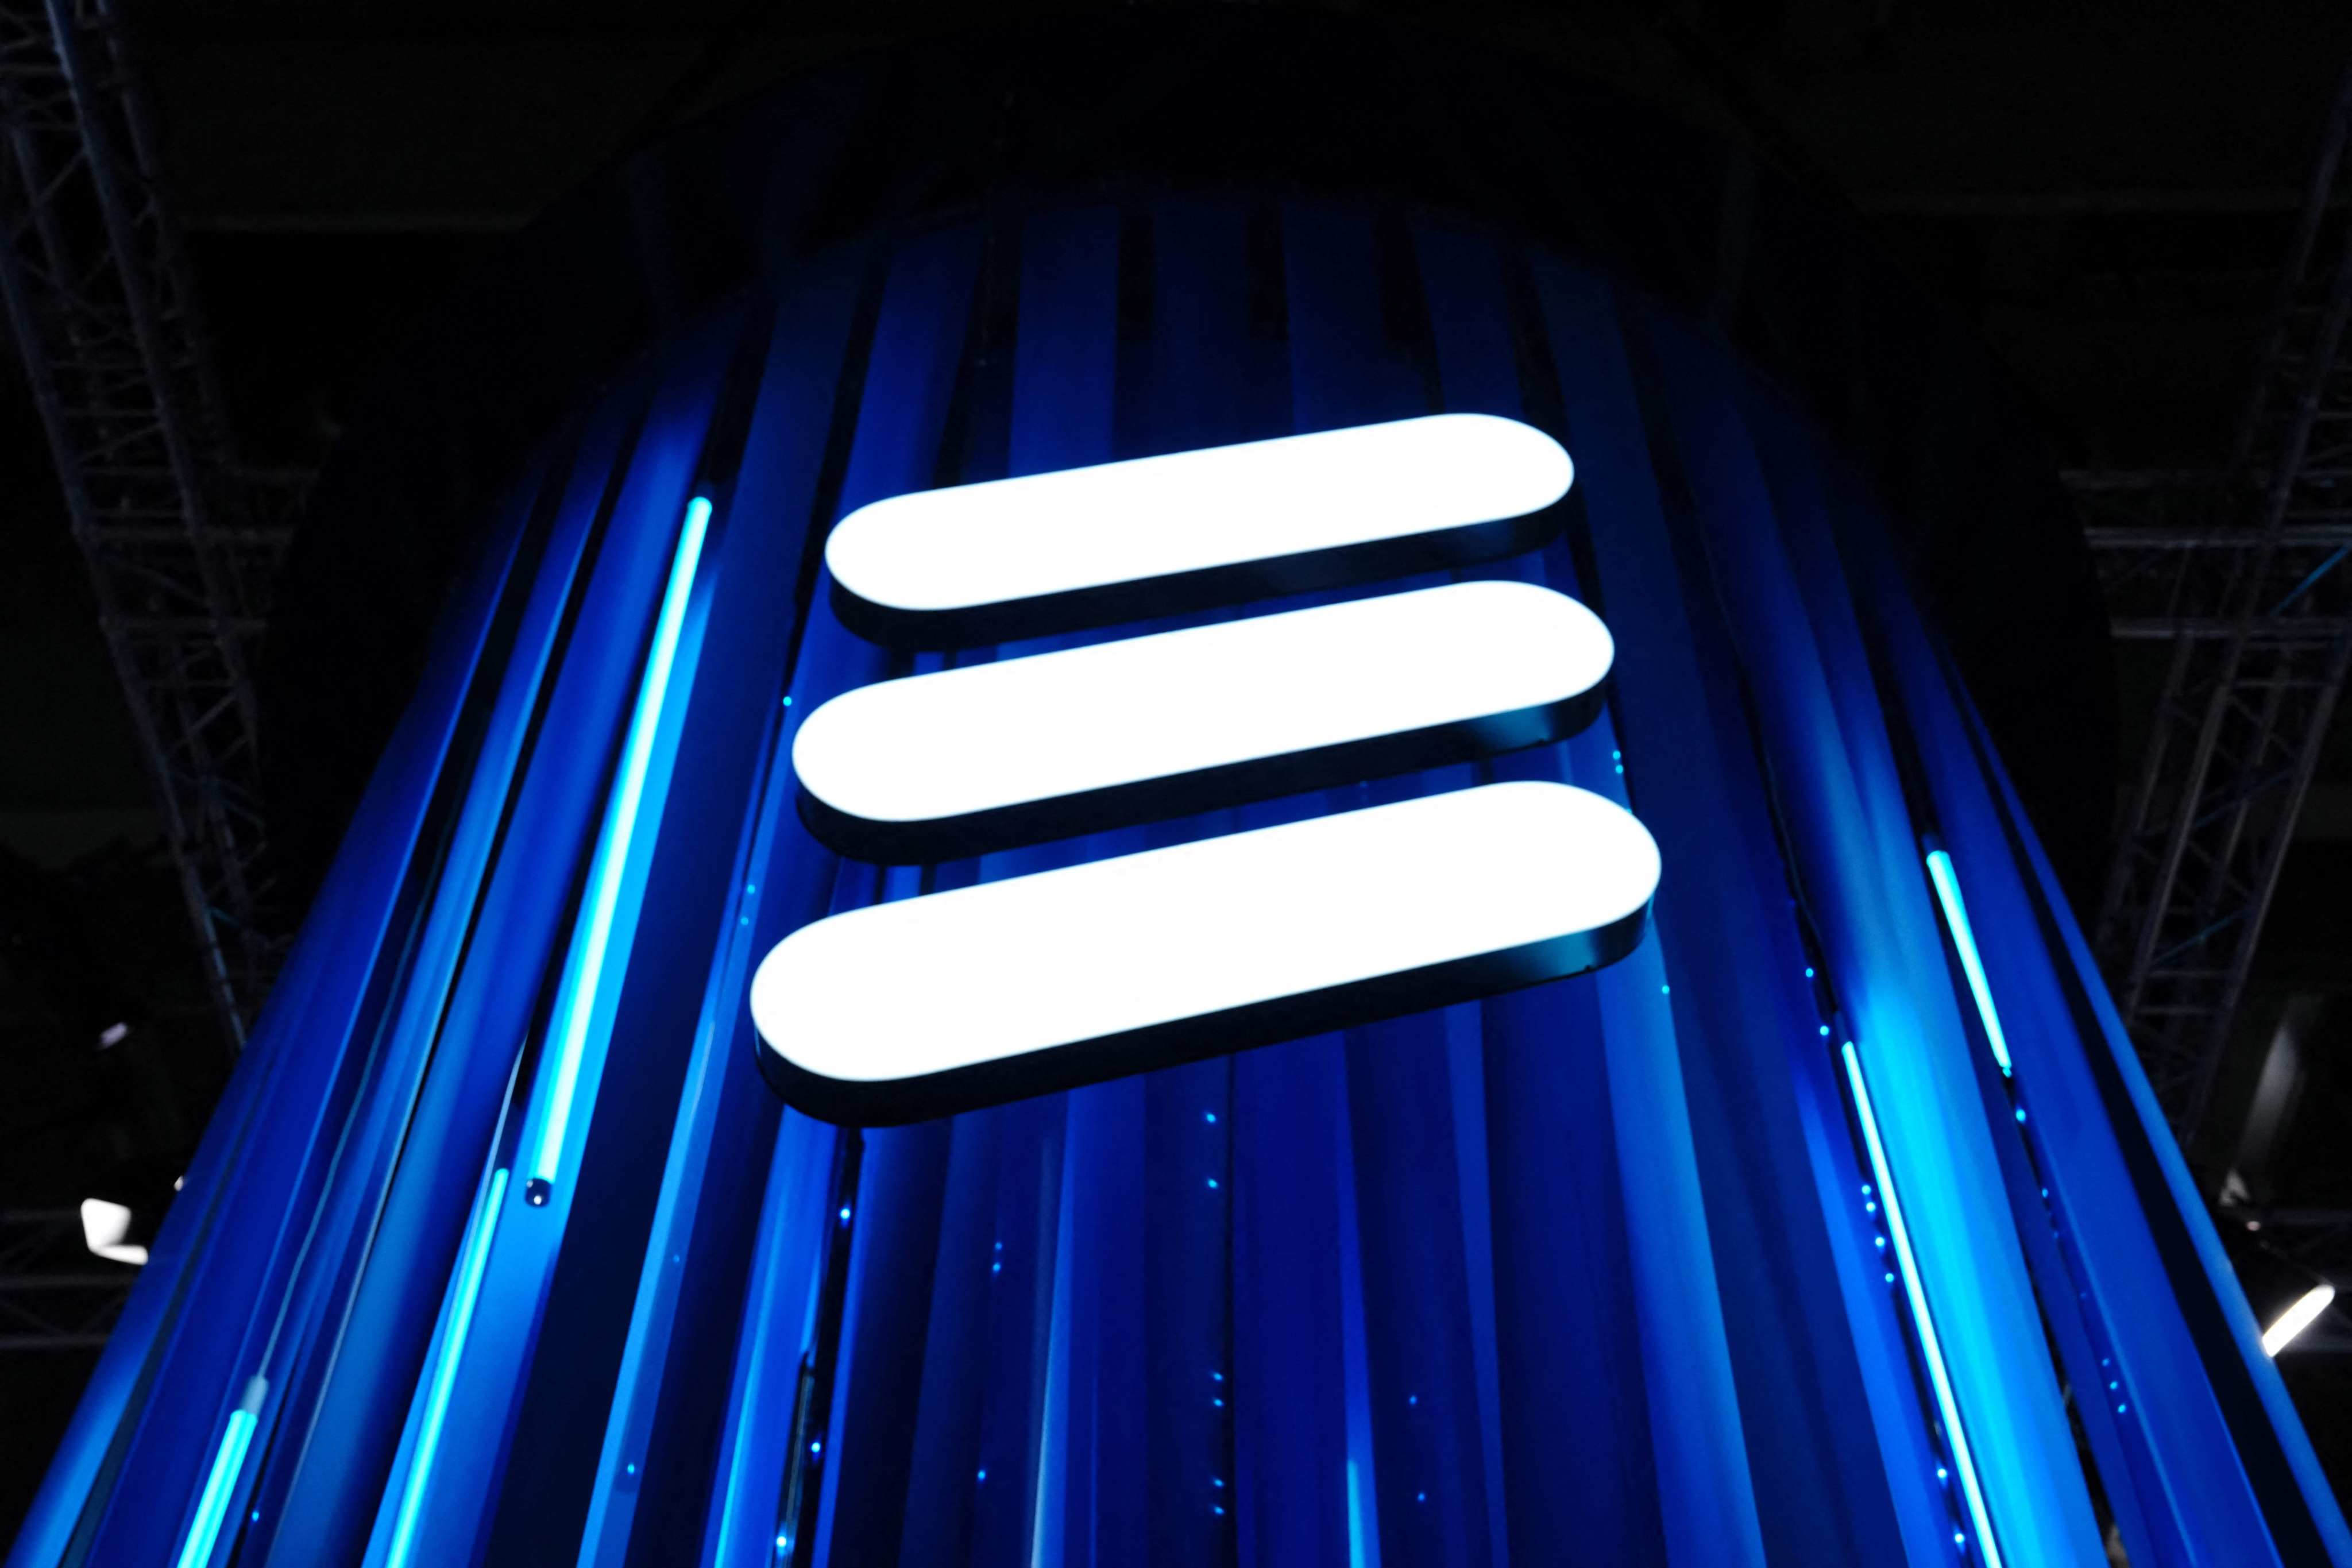 Ericsson’s logo seen during the Mobile World Congress in Barcelona, Spain, last month. Photo: AFP